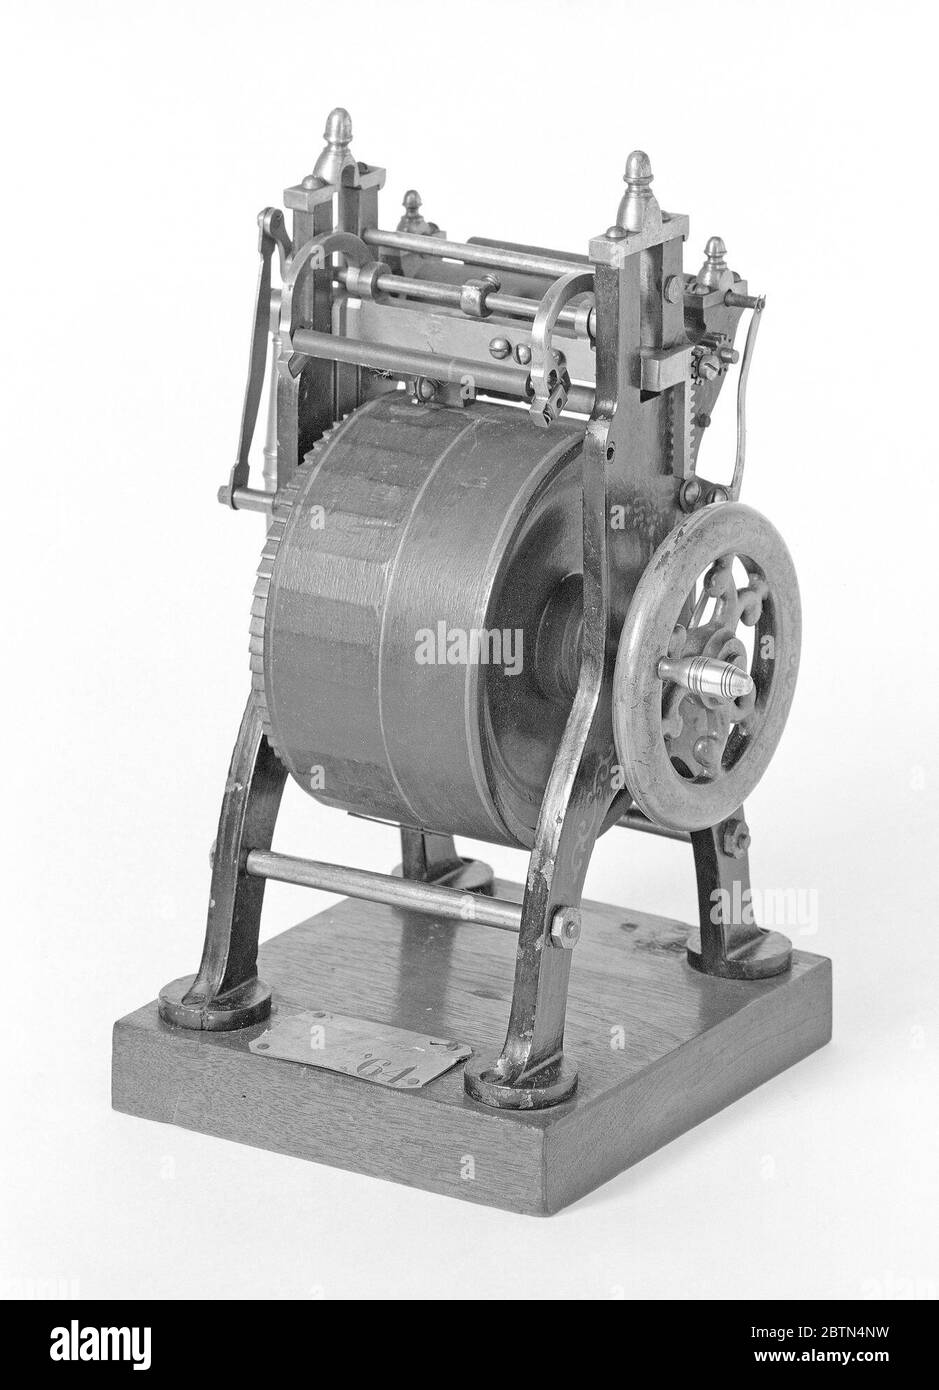 Patent Model of a Press for Card and Ticket Printing. This patent model demonstrates an invention for a card and ticket press which was granted patent number 48493. The patent details a self-inking press in which a series of flattened surfaces on a large rotating drum provided multiple platens. Stock Photo